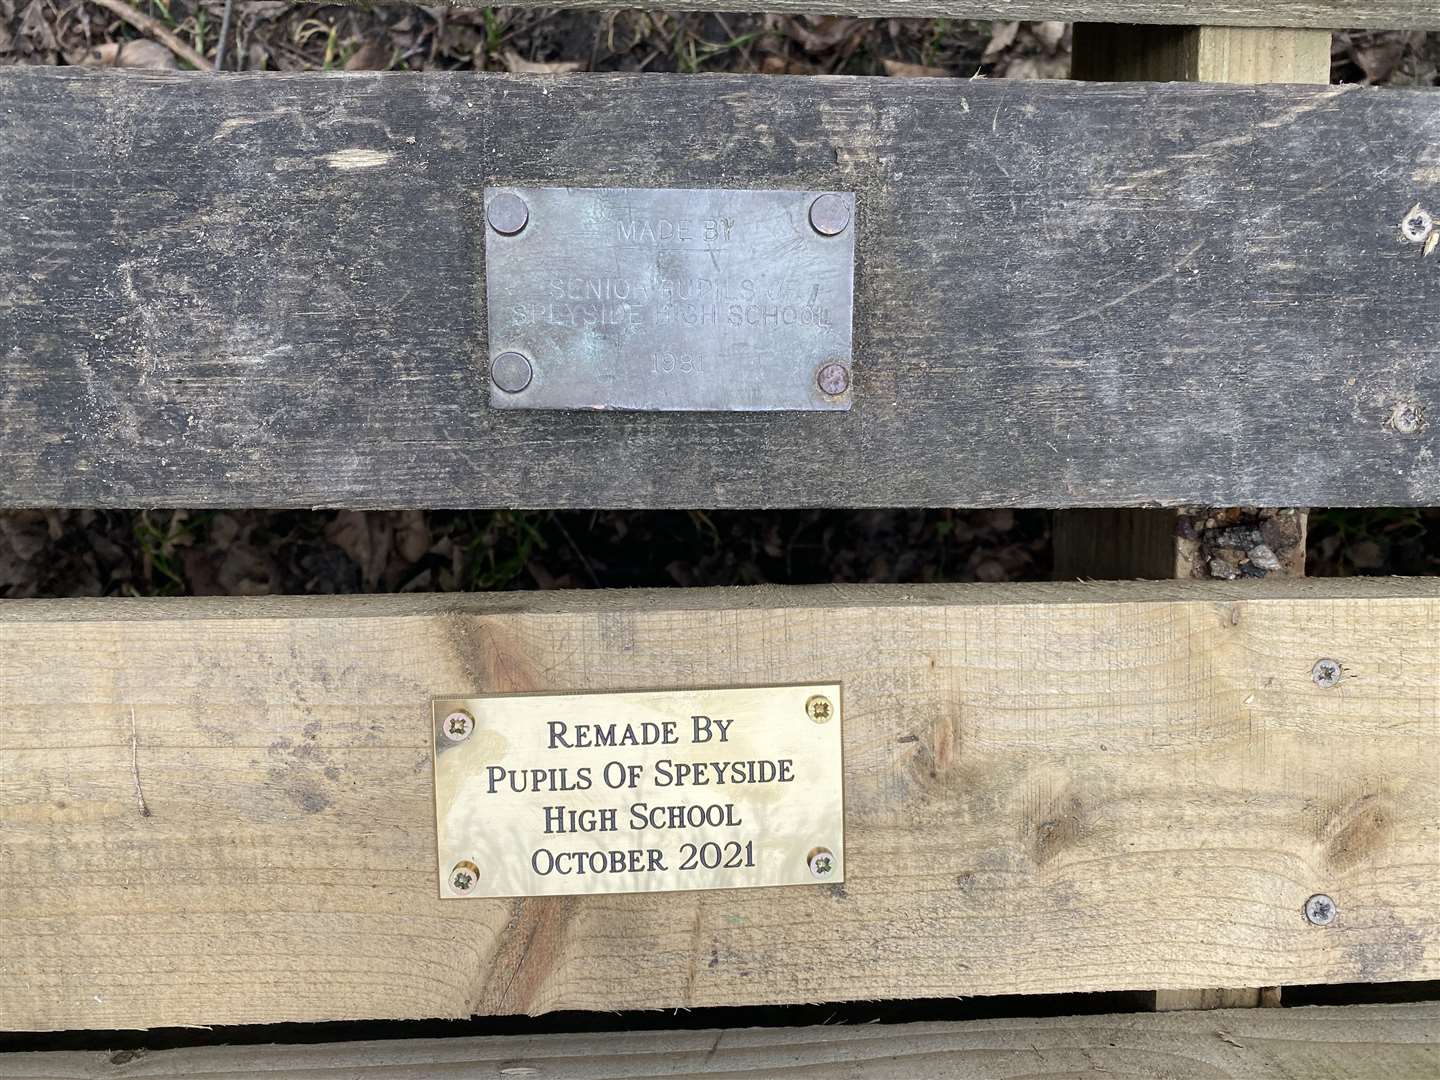 Original and new plaques commemorating Speyside High Pupils building benches.